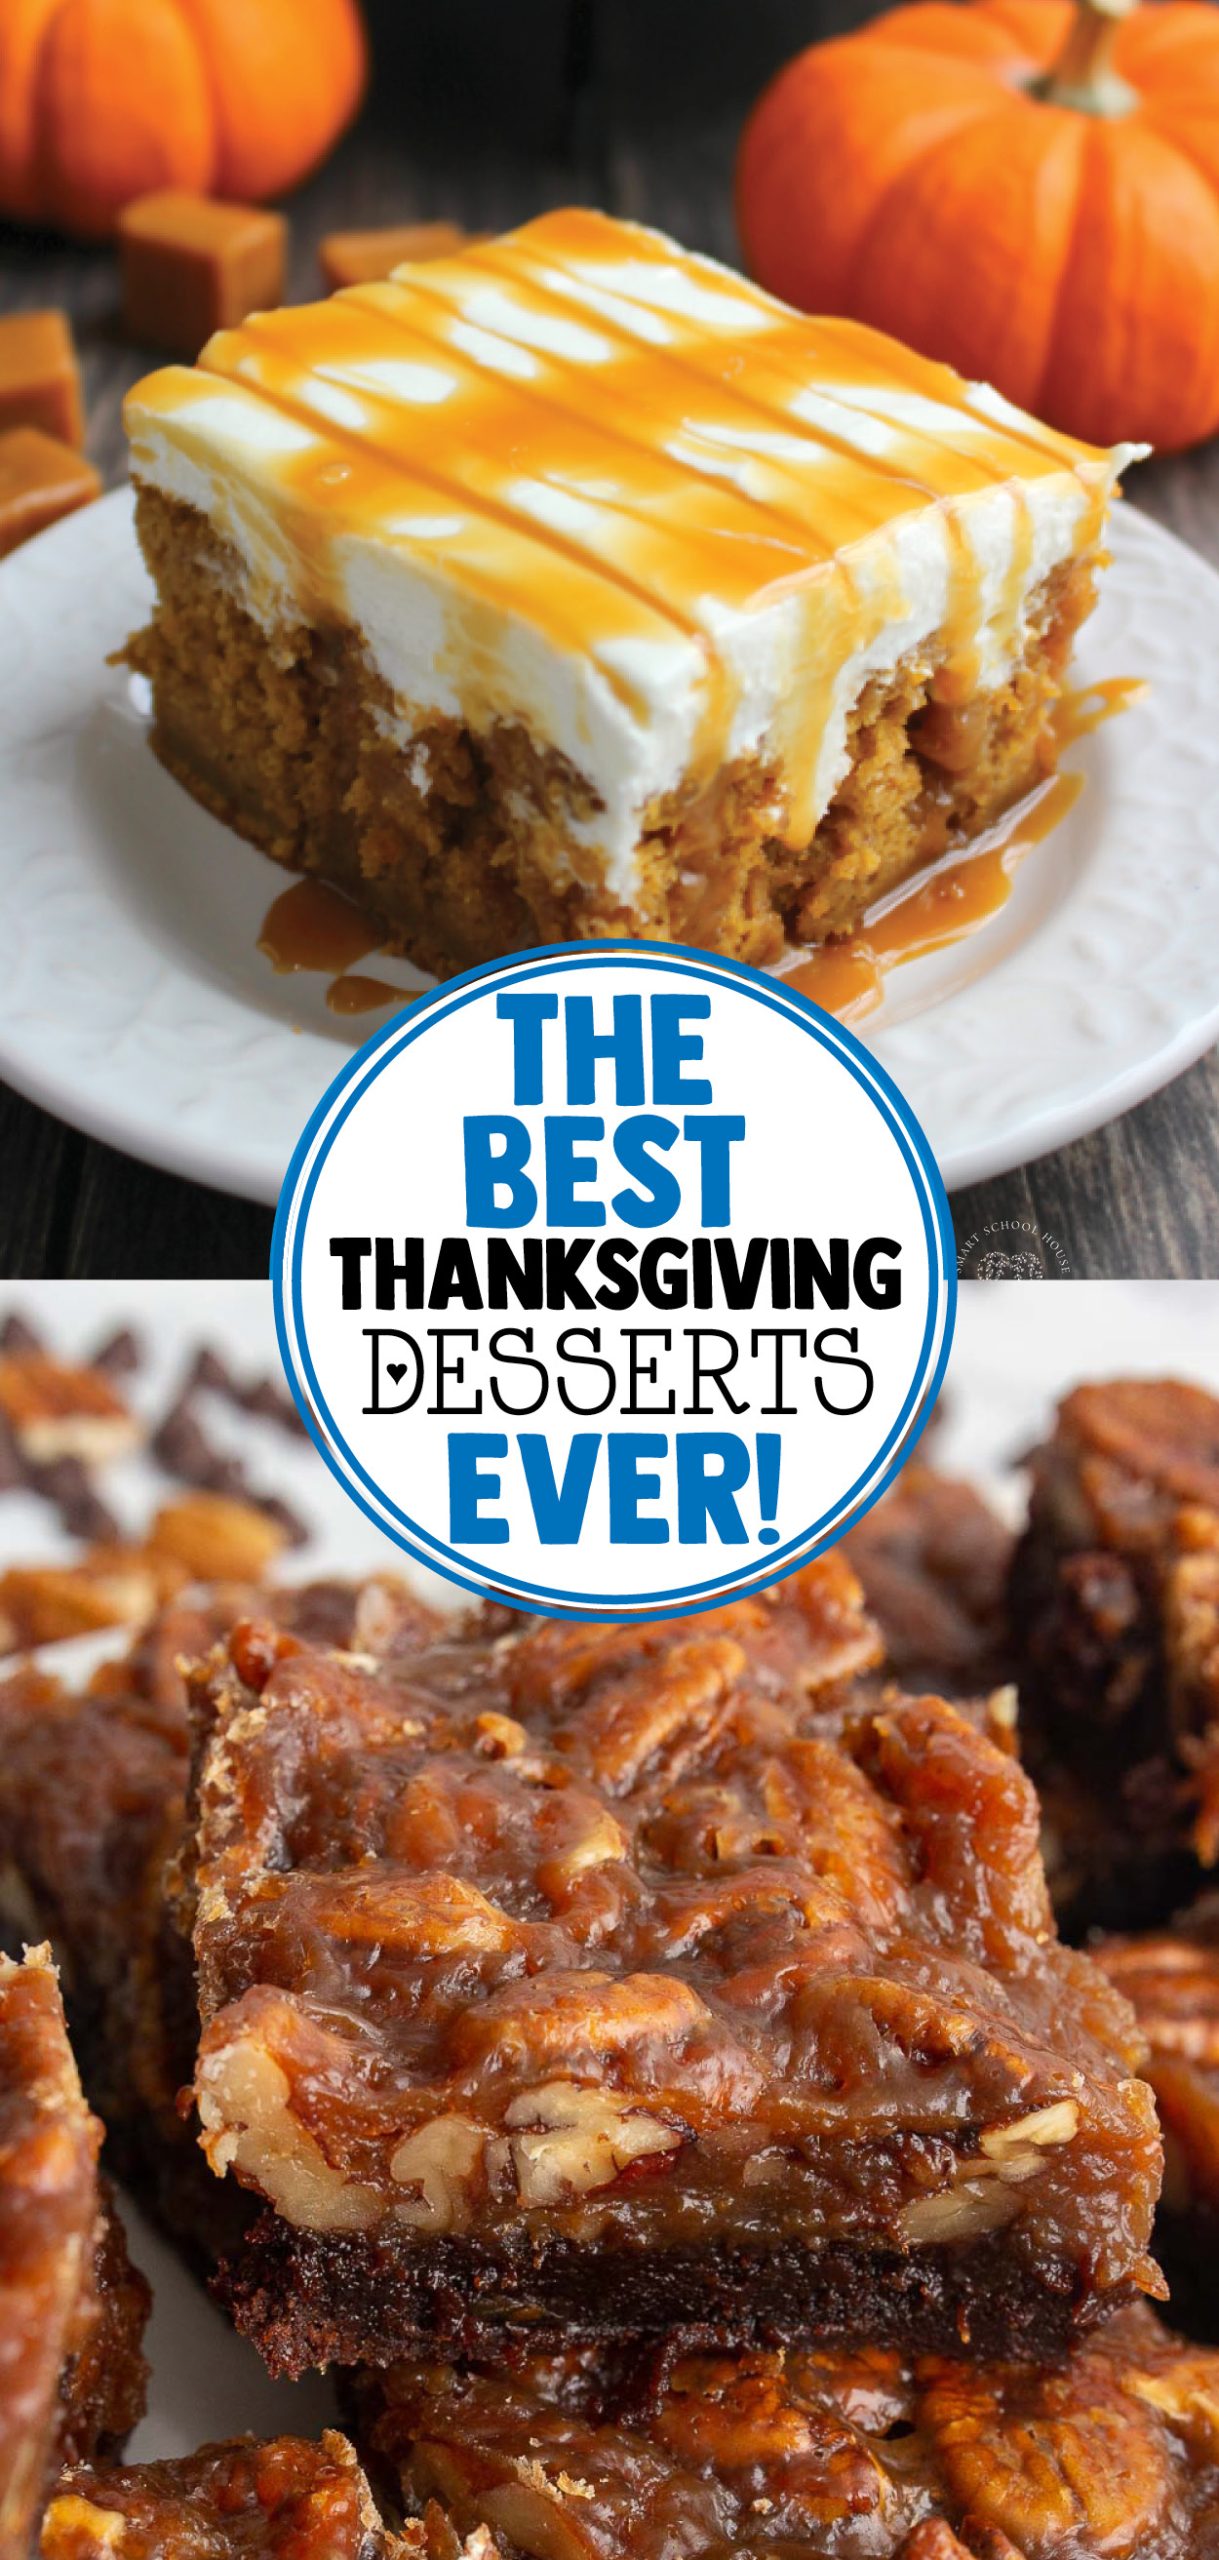 You won't believe how delicious these Thanksgiving recipes taste. This Thanksgiving you have to try one of these recipes. These are the best Thanksgiving desserts ever! Try a new dessert for your Thanksgiving dinner this year. These easy and delicious recipes are sure to make your Thanksgiving dinner memorable. Try one of these delicious dessert recipes. You will be sure to find the perfect dessert for your family meal this Thanksgiving. #Thanksgiving #recipe #dessert #chocolate #homemade